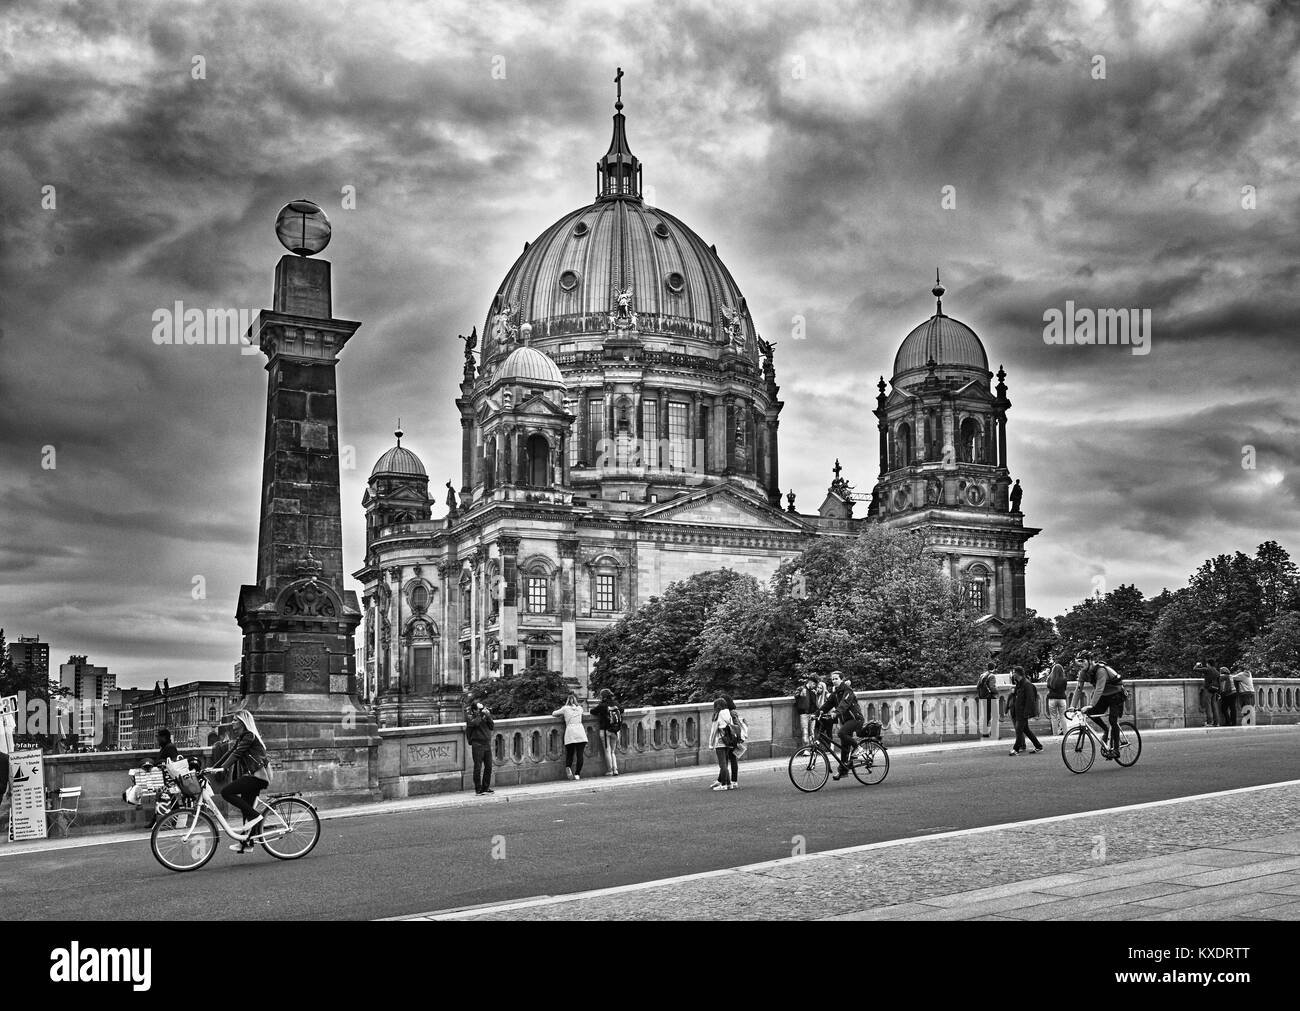 Berlin, Germany, September 7 / 2017 Berlin cathedral, Berliner Dom, suggestive winter atmosphere - black and white photography Stock Photo